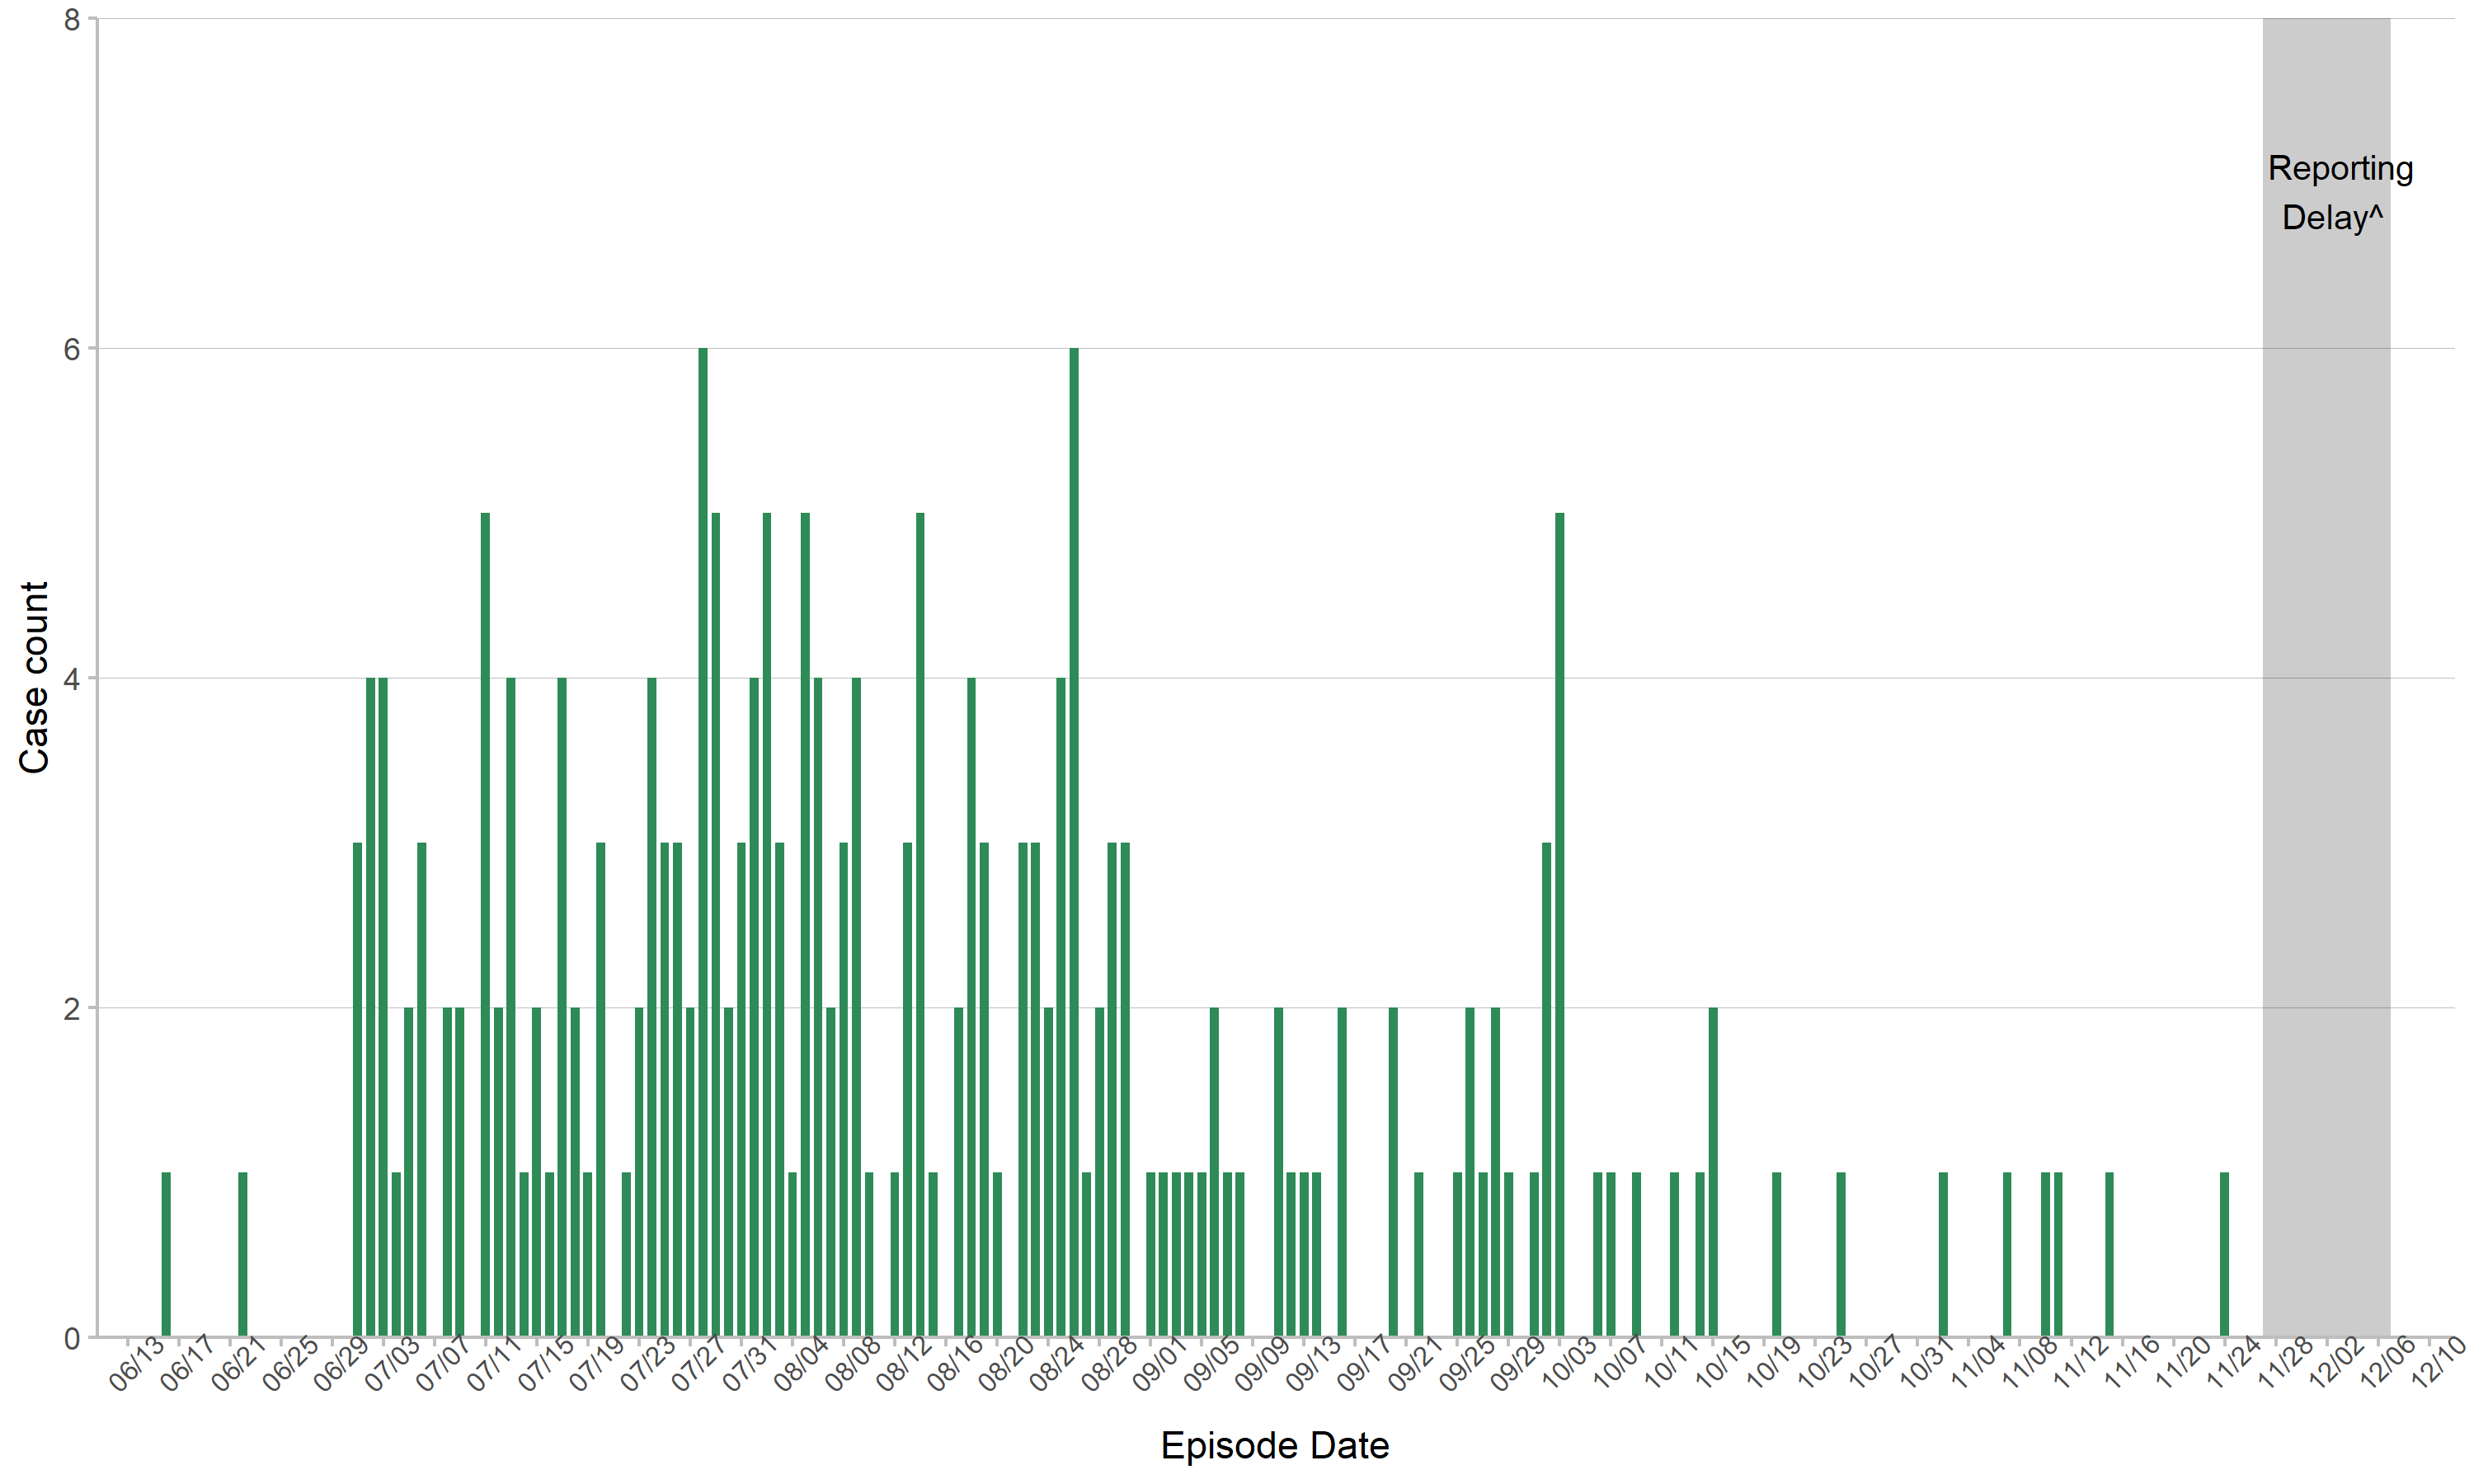 This bar graph shows the number of Santa Clara County MPOX cases by episode date.  Episode dates range from 6/16/22 to 11/24/22, with the highest number of cases (6) reported on 7/28/2022 and 08/26/2022. Cases have continued to decline since 10/03/2022